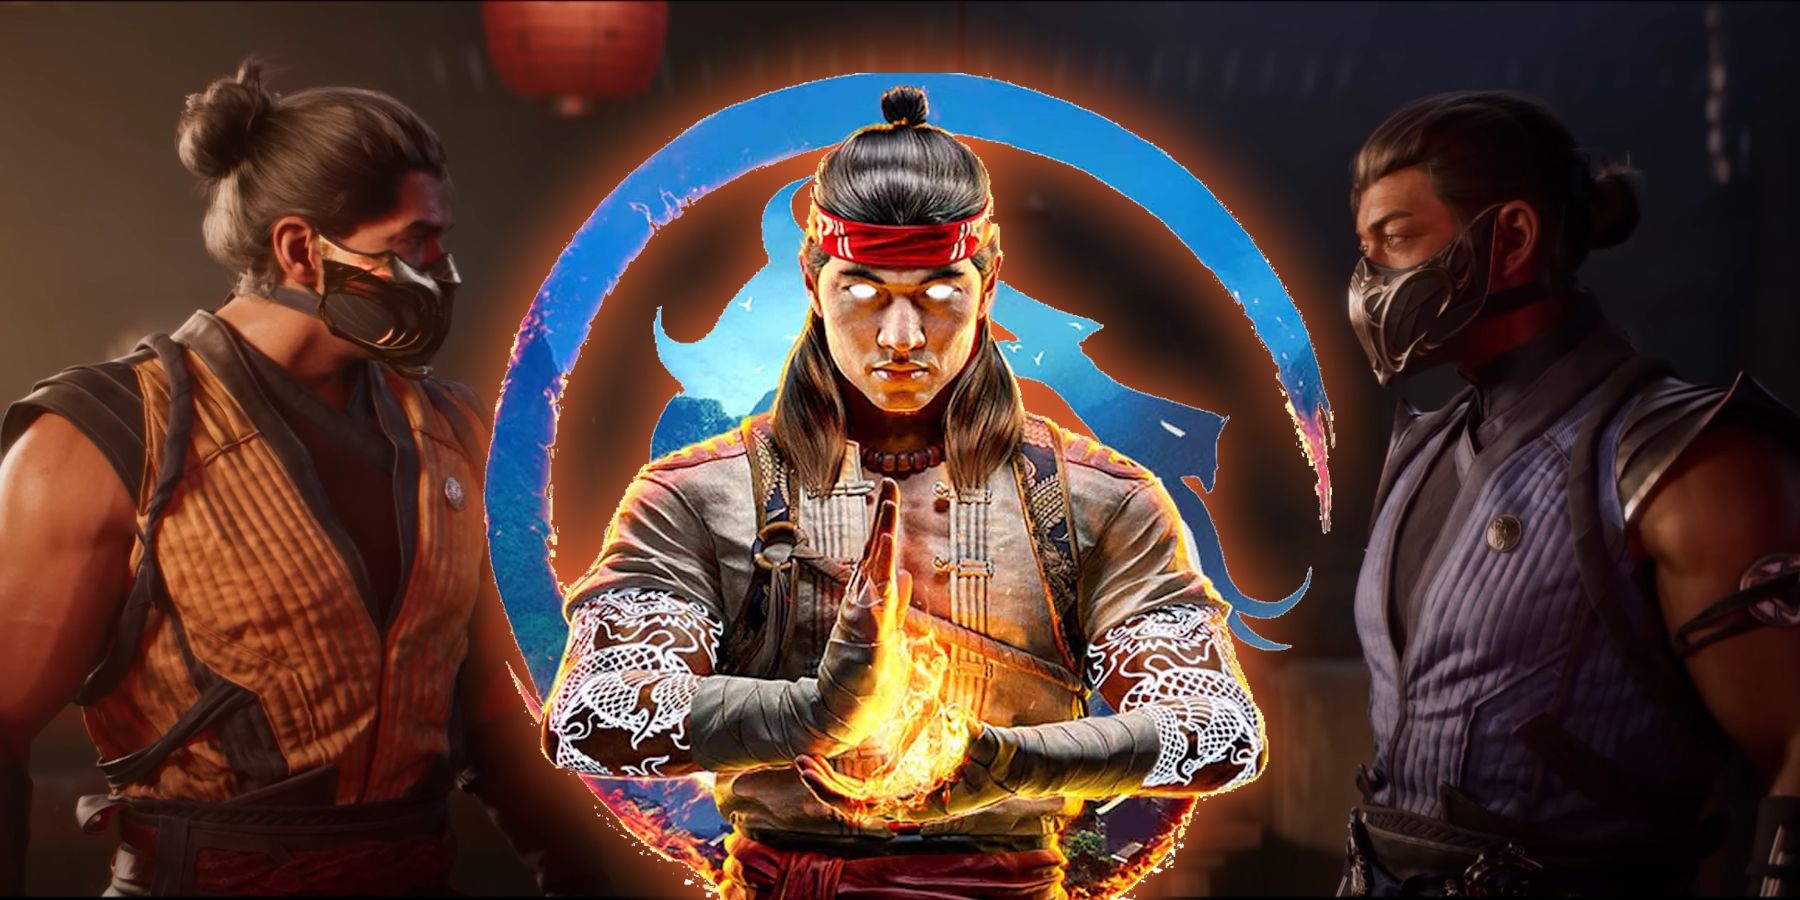 Why Mortal Kombat 1 May Be Primetime for Villain Redemption Arcs